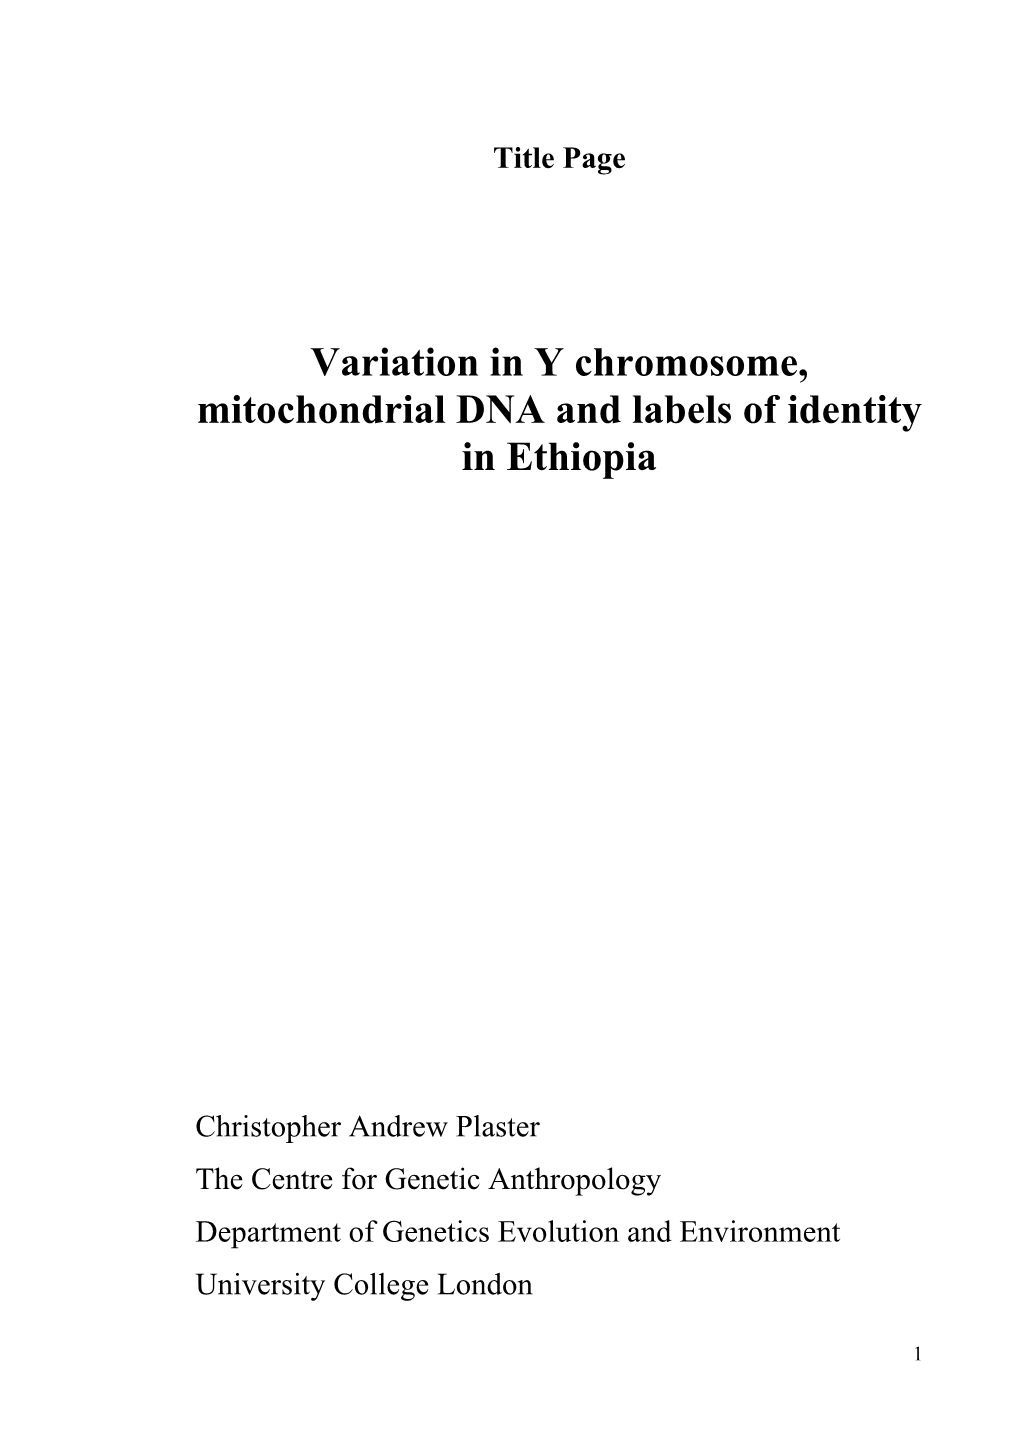 Variation in Y Chromosome, Mitochondrial DNA and Labels of Identity in Ethiopia